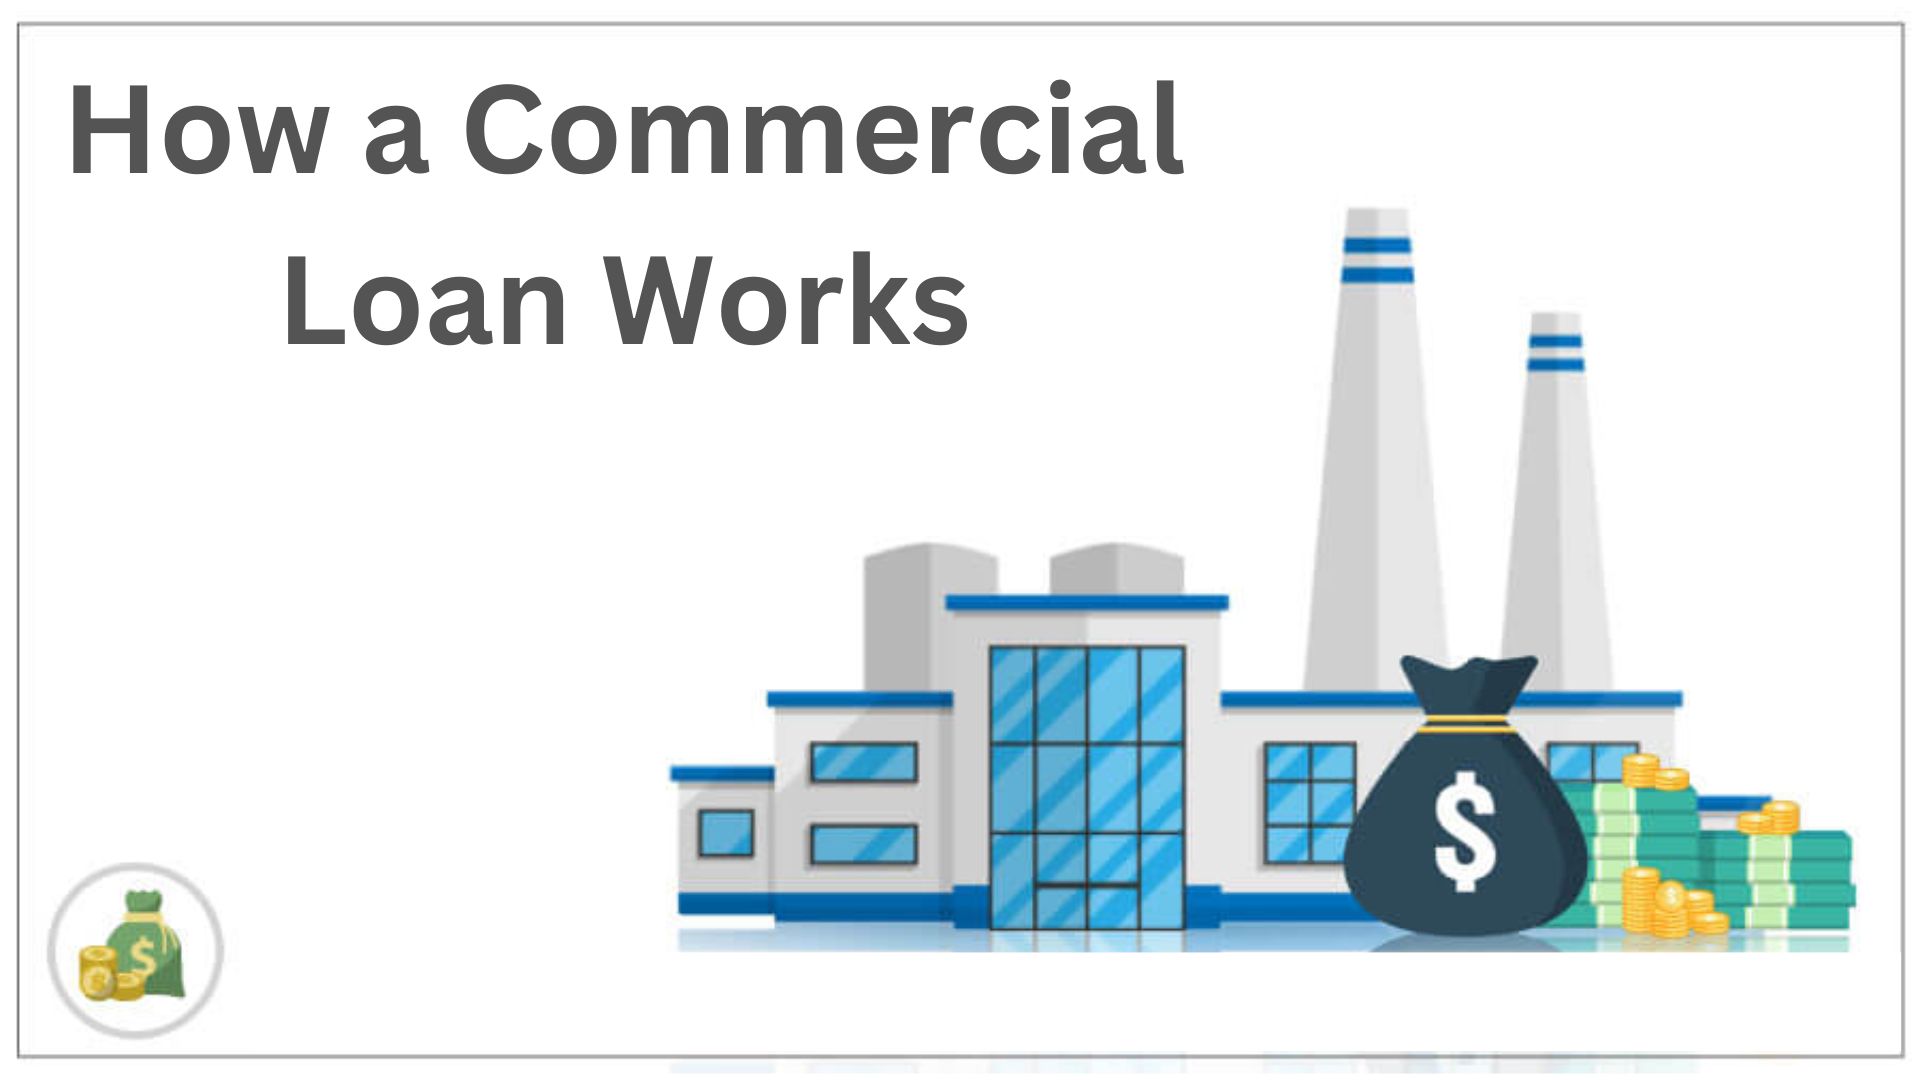 How a Commercial Loan Works